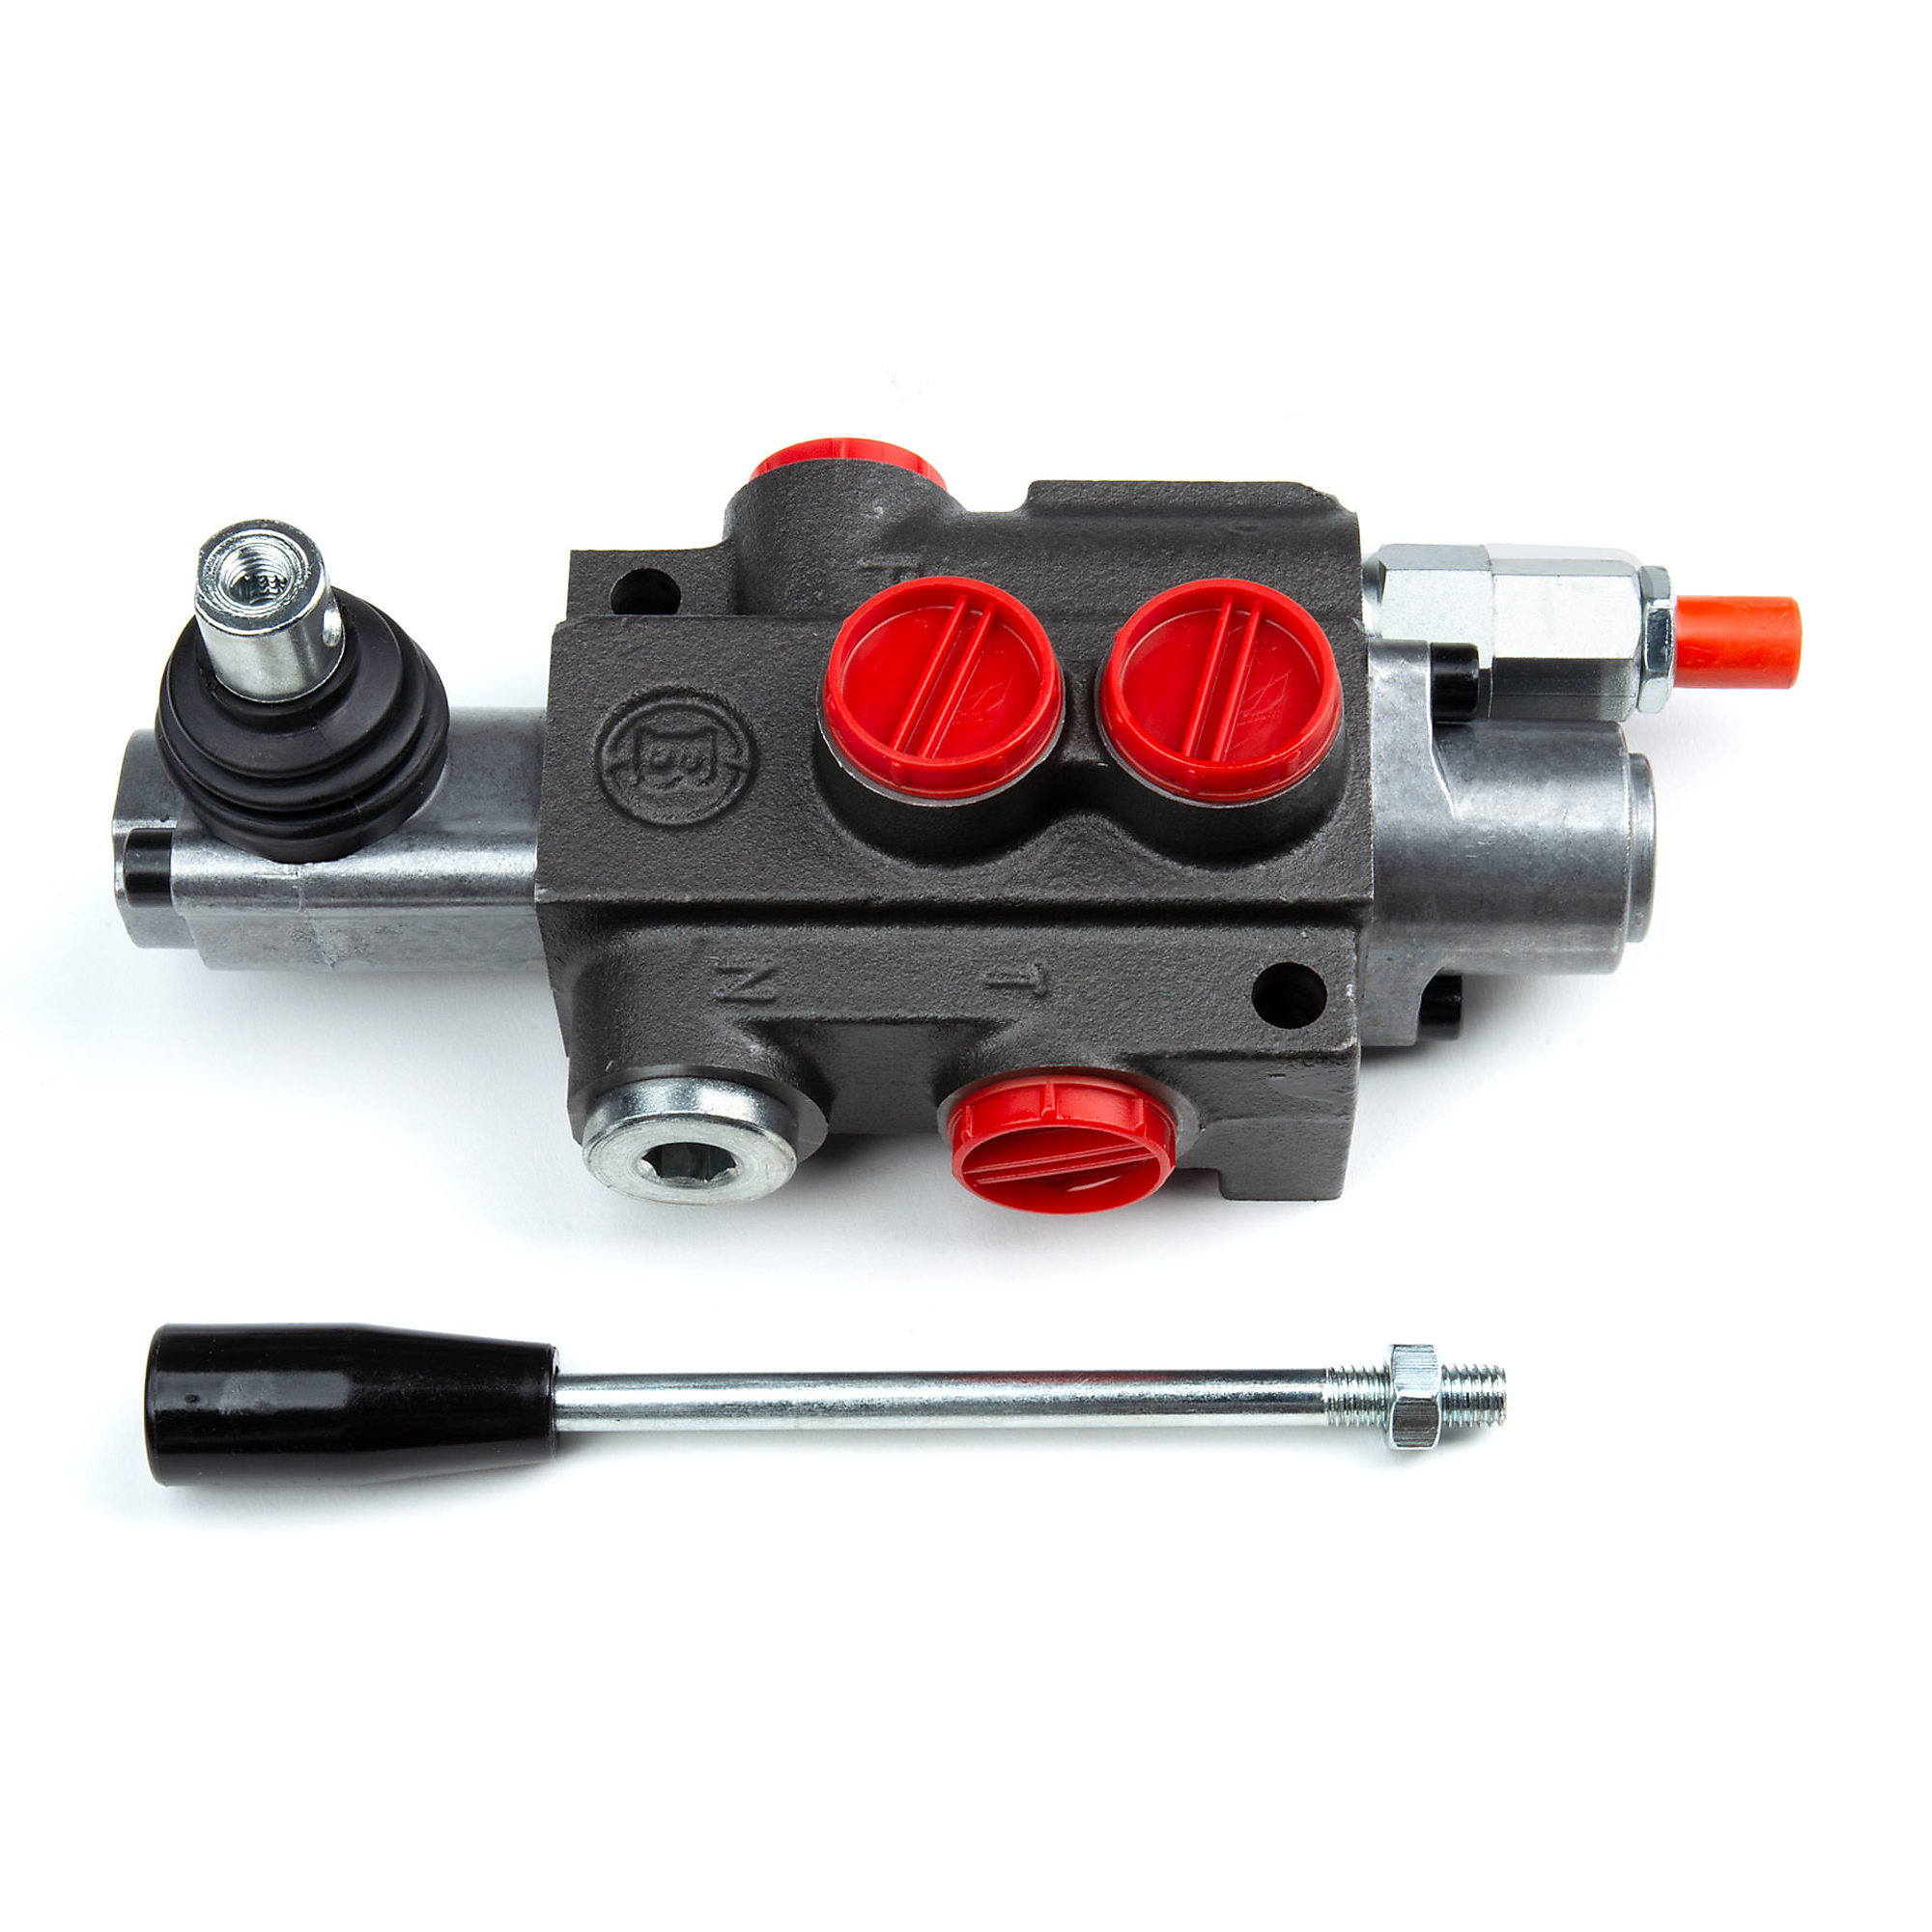 Chief, Hydraulic Directional Valve, GPM 10, Working Port #8 SAE in, Max. PSI  3625, Model# 220906 Northern Tool